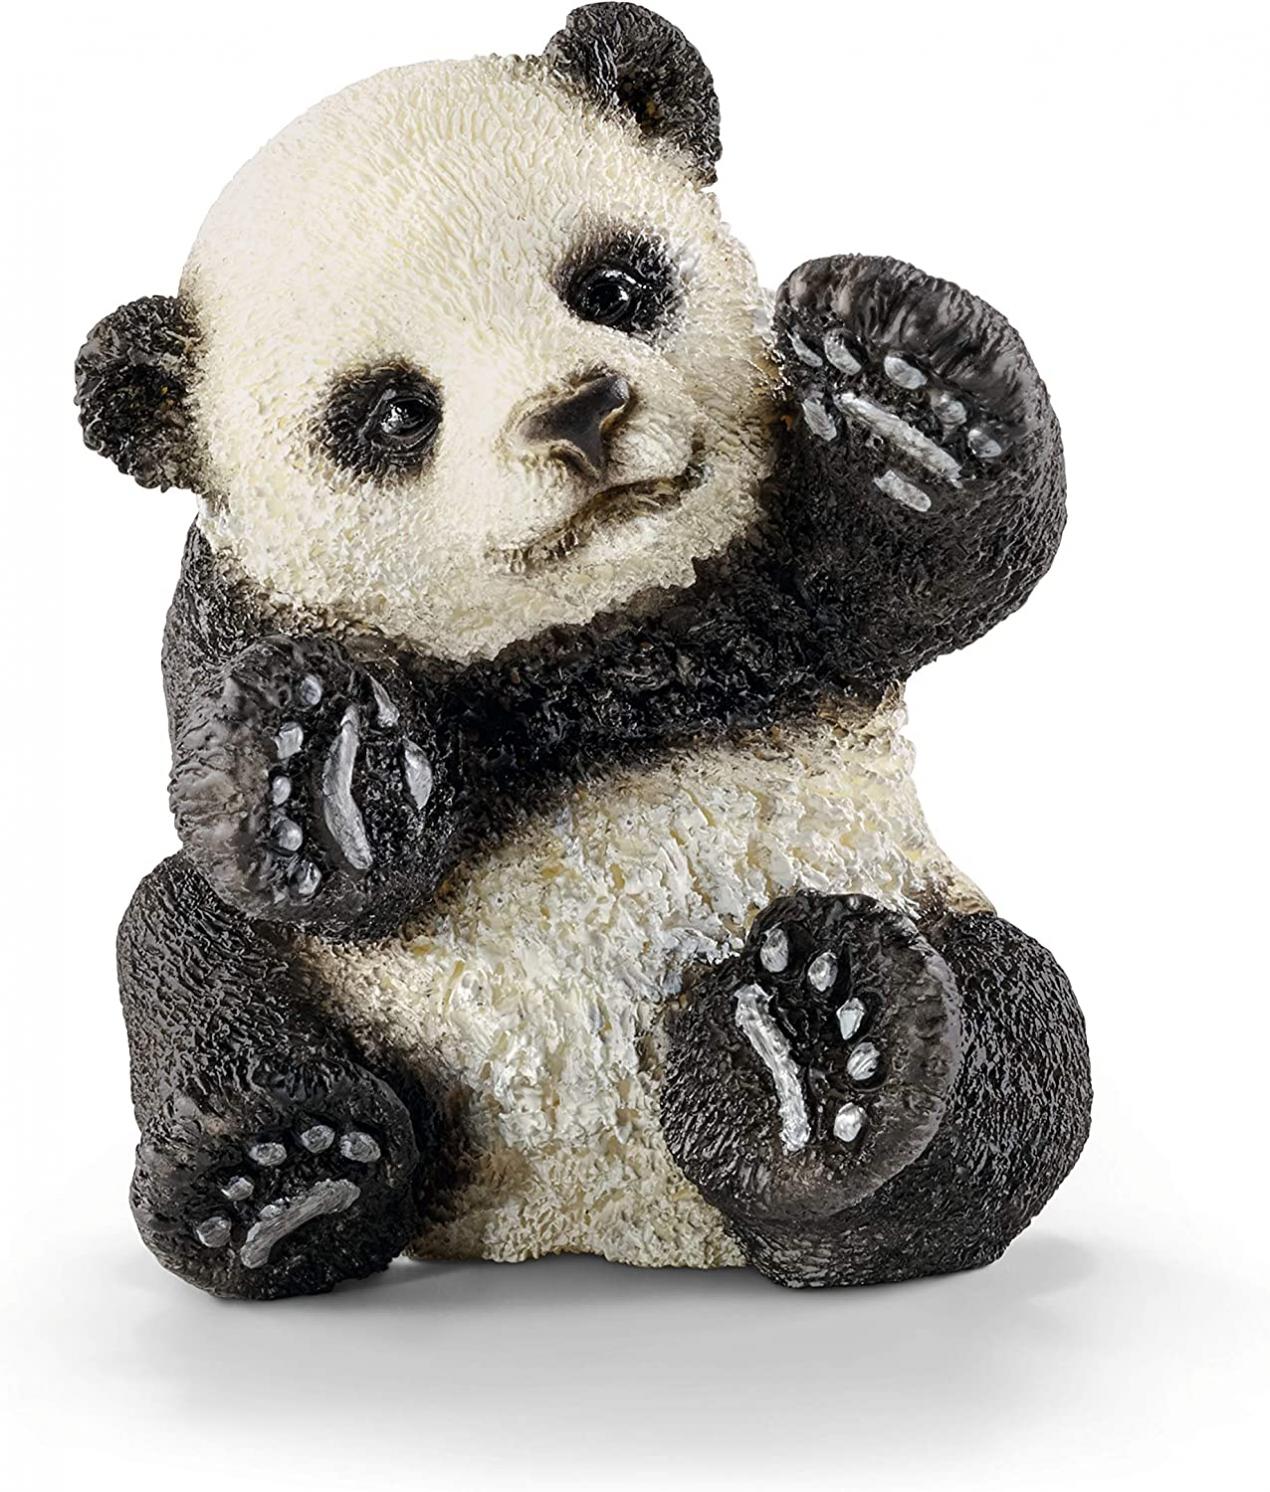 Schleich Wild Life, Wild Animal Jungle Toys for Boys and Girls, Baby Panda Cub Toy Figurine, Ages 3+